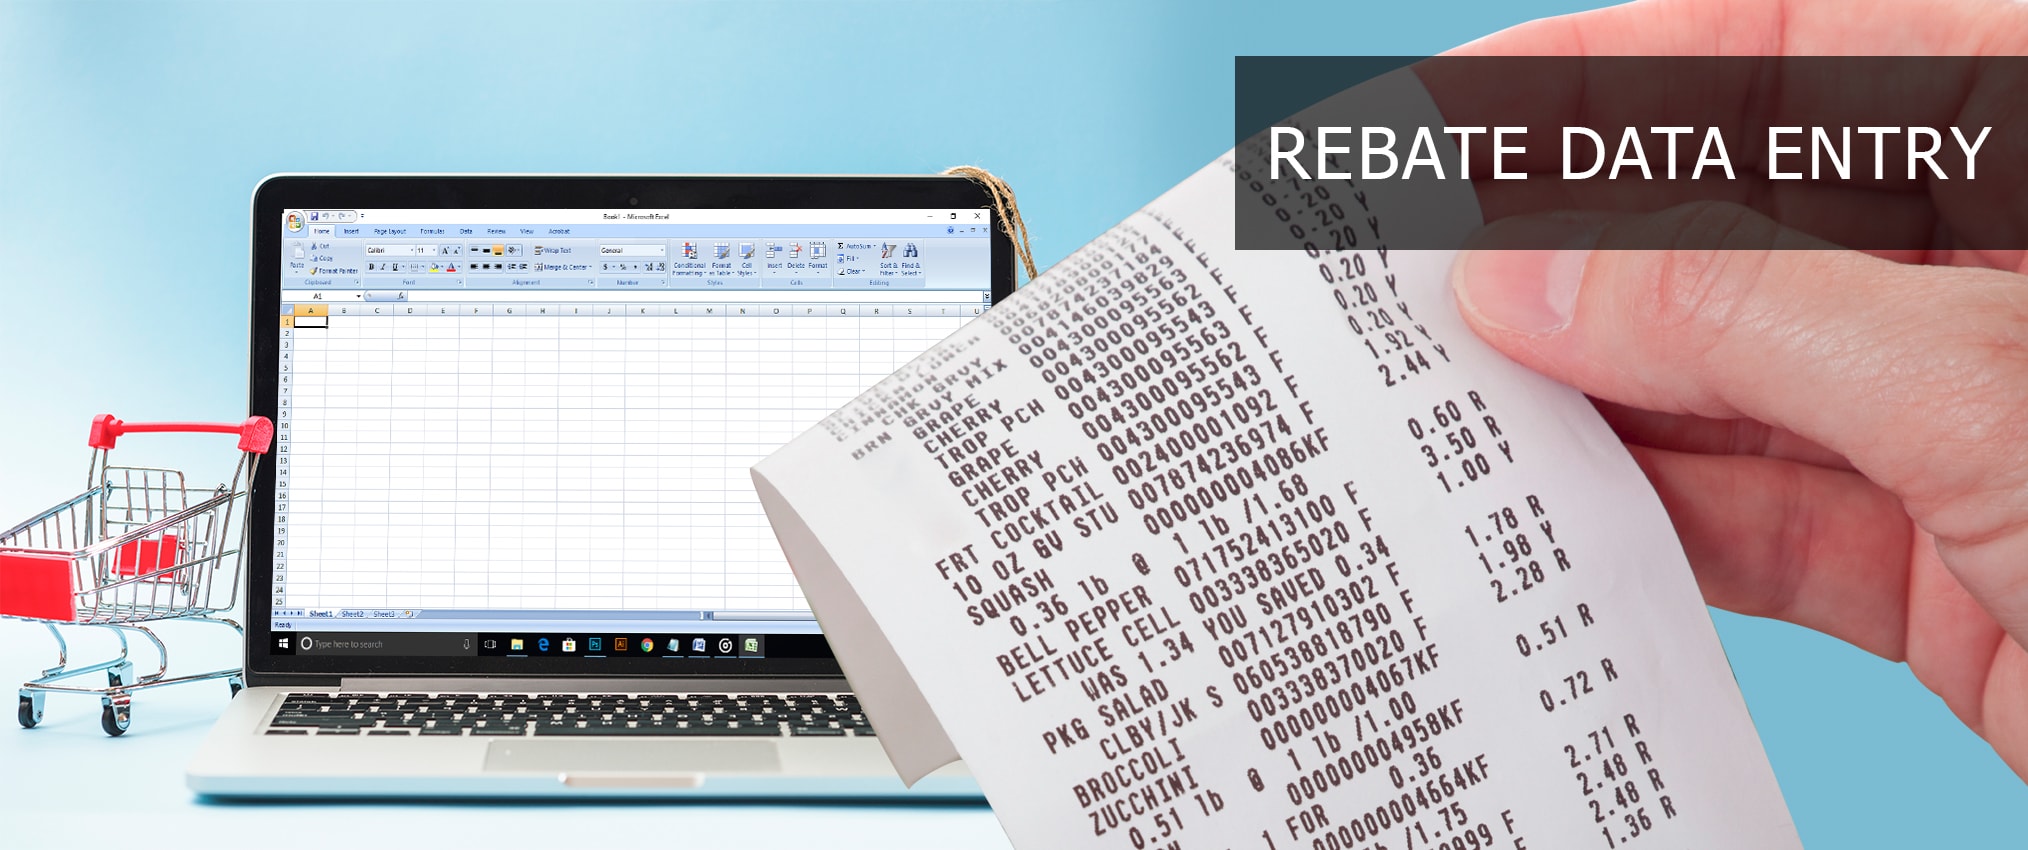 How To Improve The Accuracy Of Rebate Data Entry BpoDataentryHelp